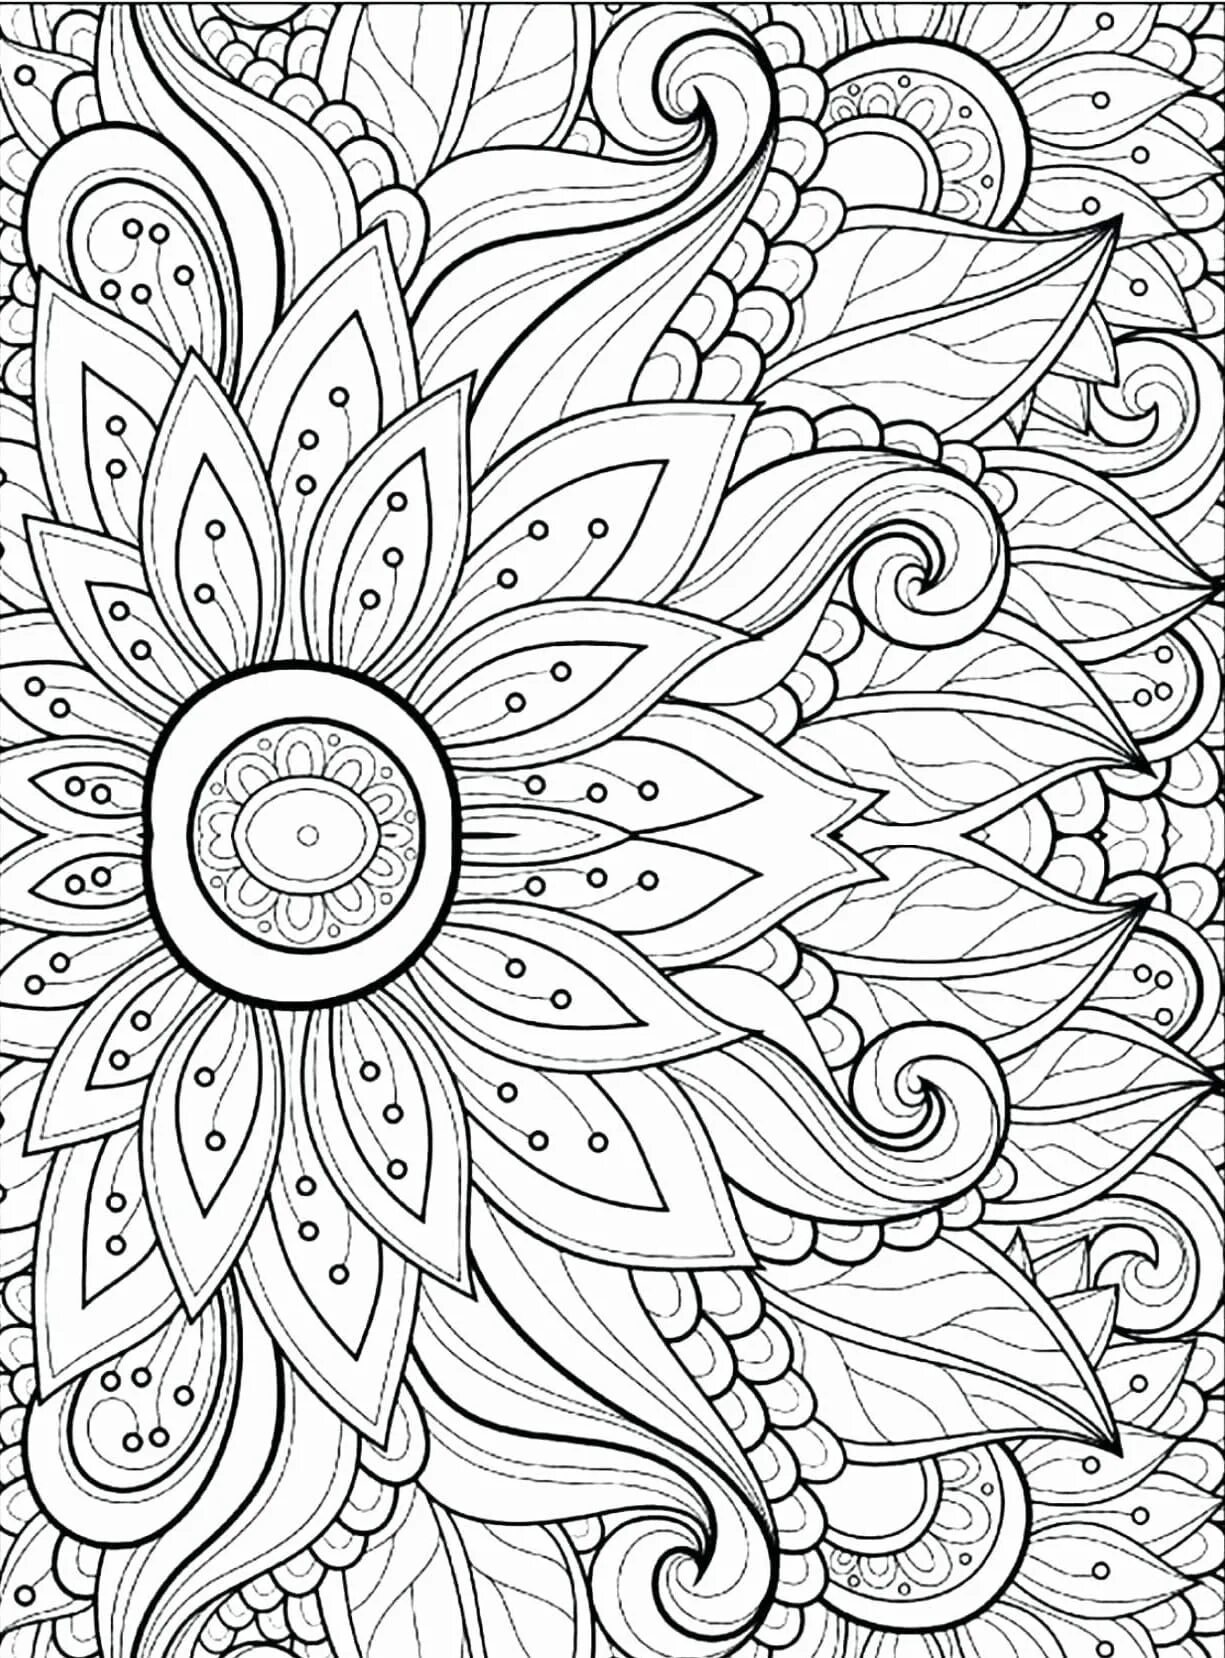 Exquisite anti-stress light large coloring book